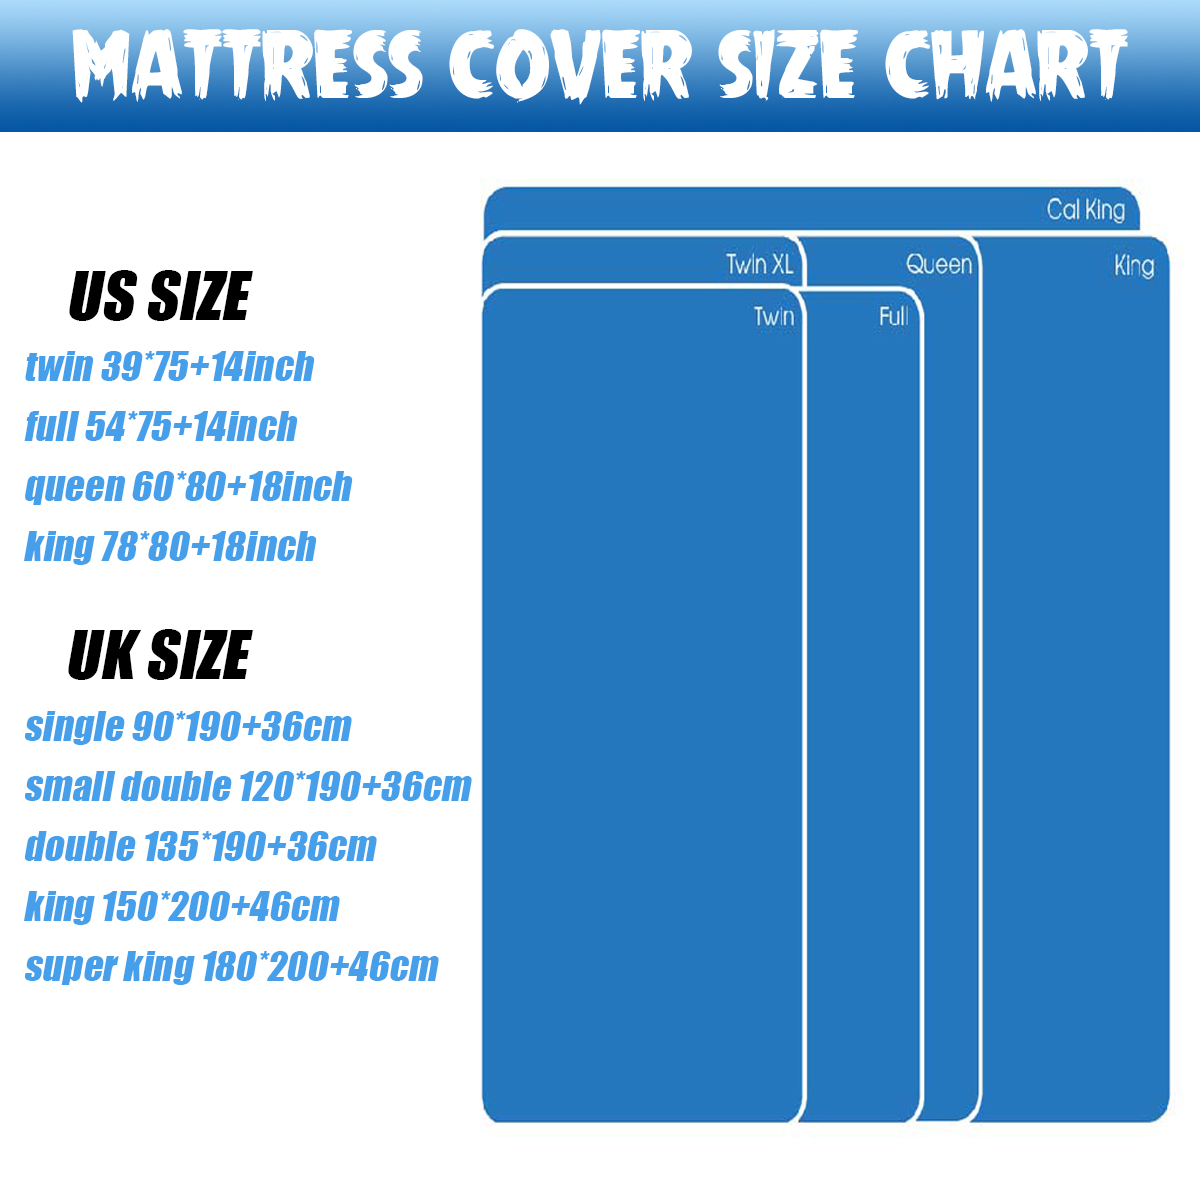 Waterproof-Bamboo-Jacquard-Mattress-Topper-Protector-Cover-Pad-Hypoallergenic-Bedding-Set-1688692-7